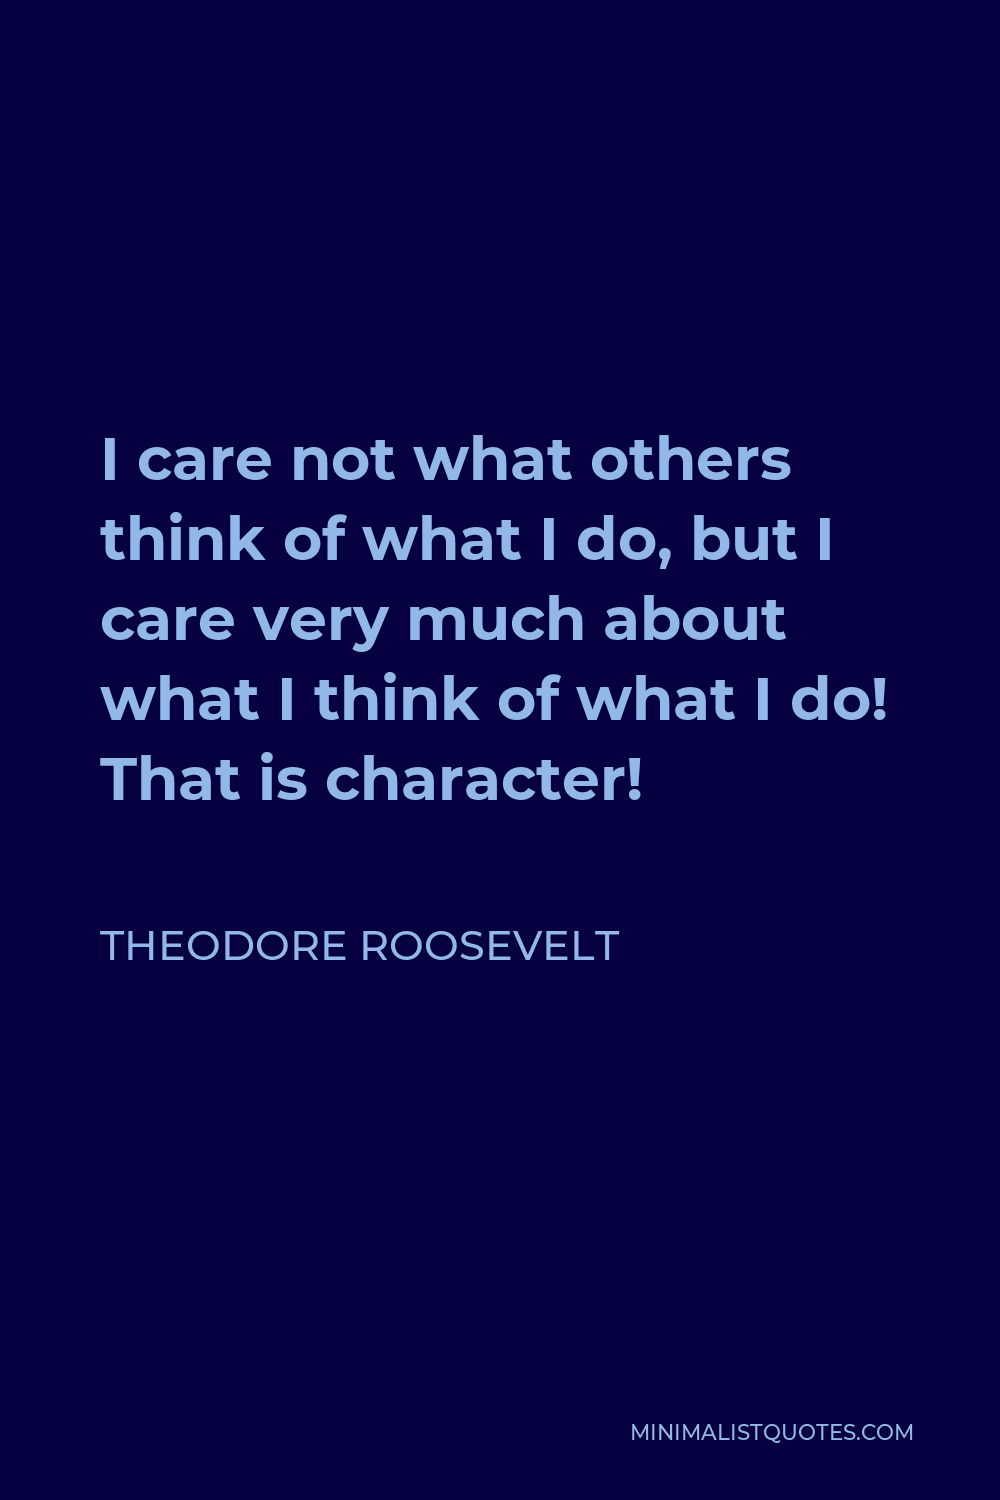 Theodore Roosevelt Quote - I care not what others think of what I do, but I care very much about what I think of what I do! That is character!